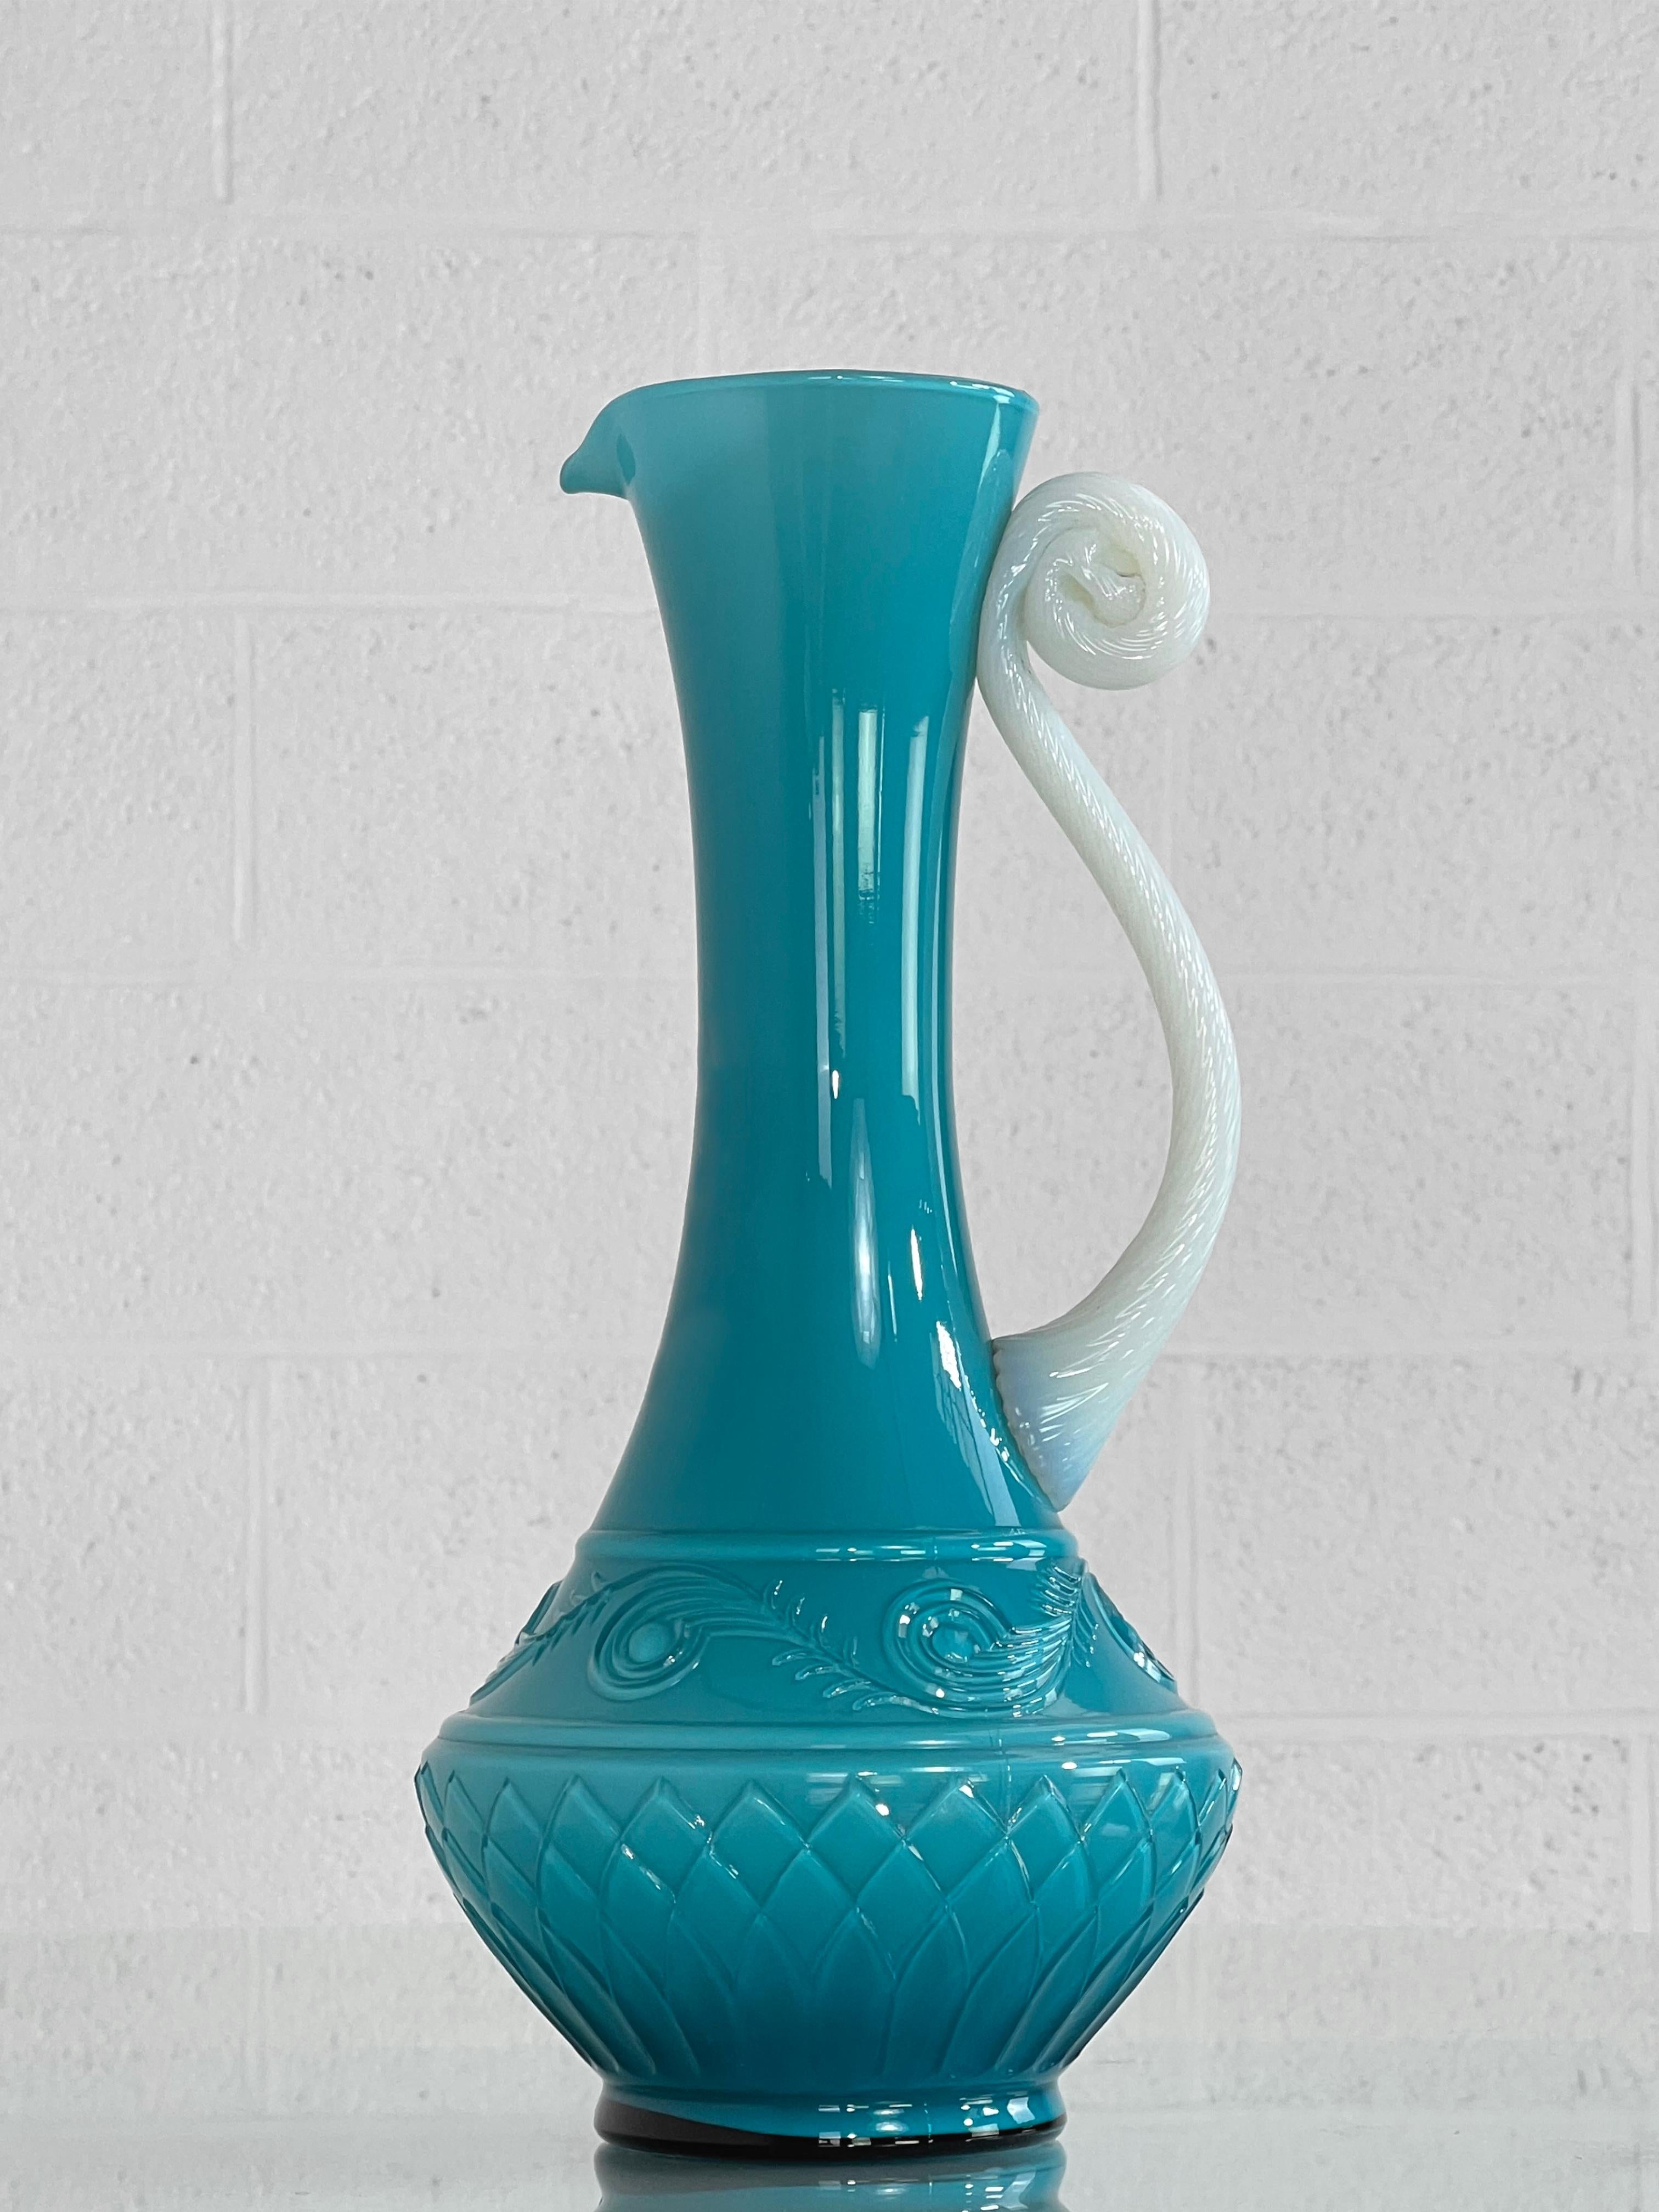 1960s Handmade Glass Pitcher Vase with turquoise color base sculpted glass adorned with a off white handmade handle